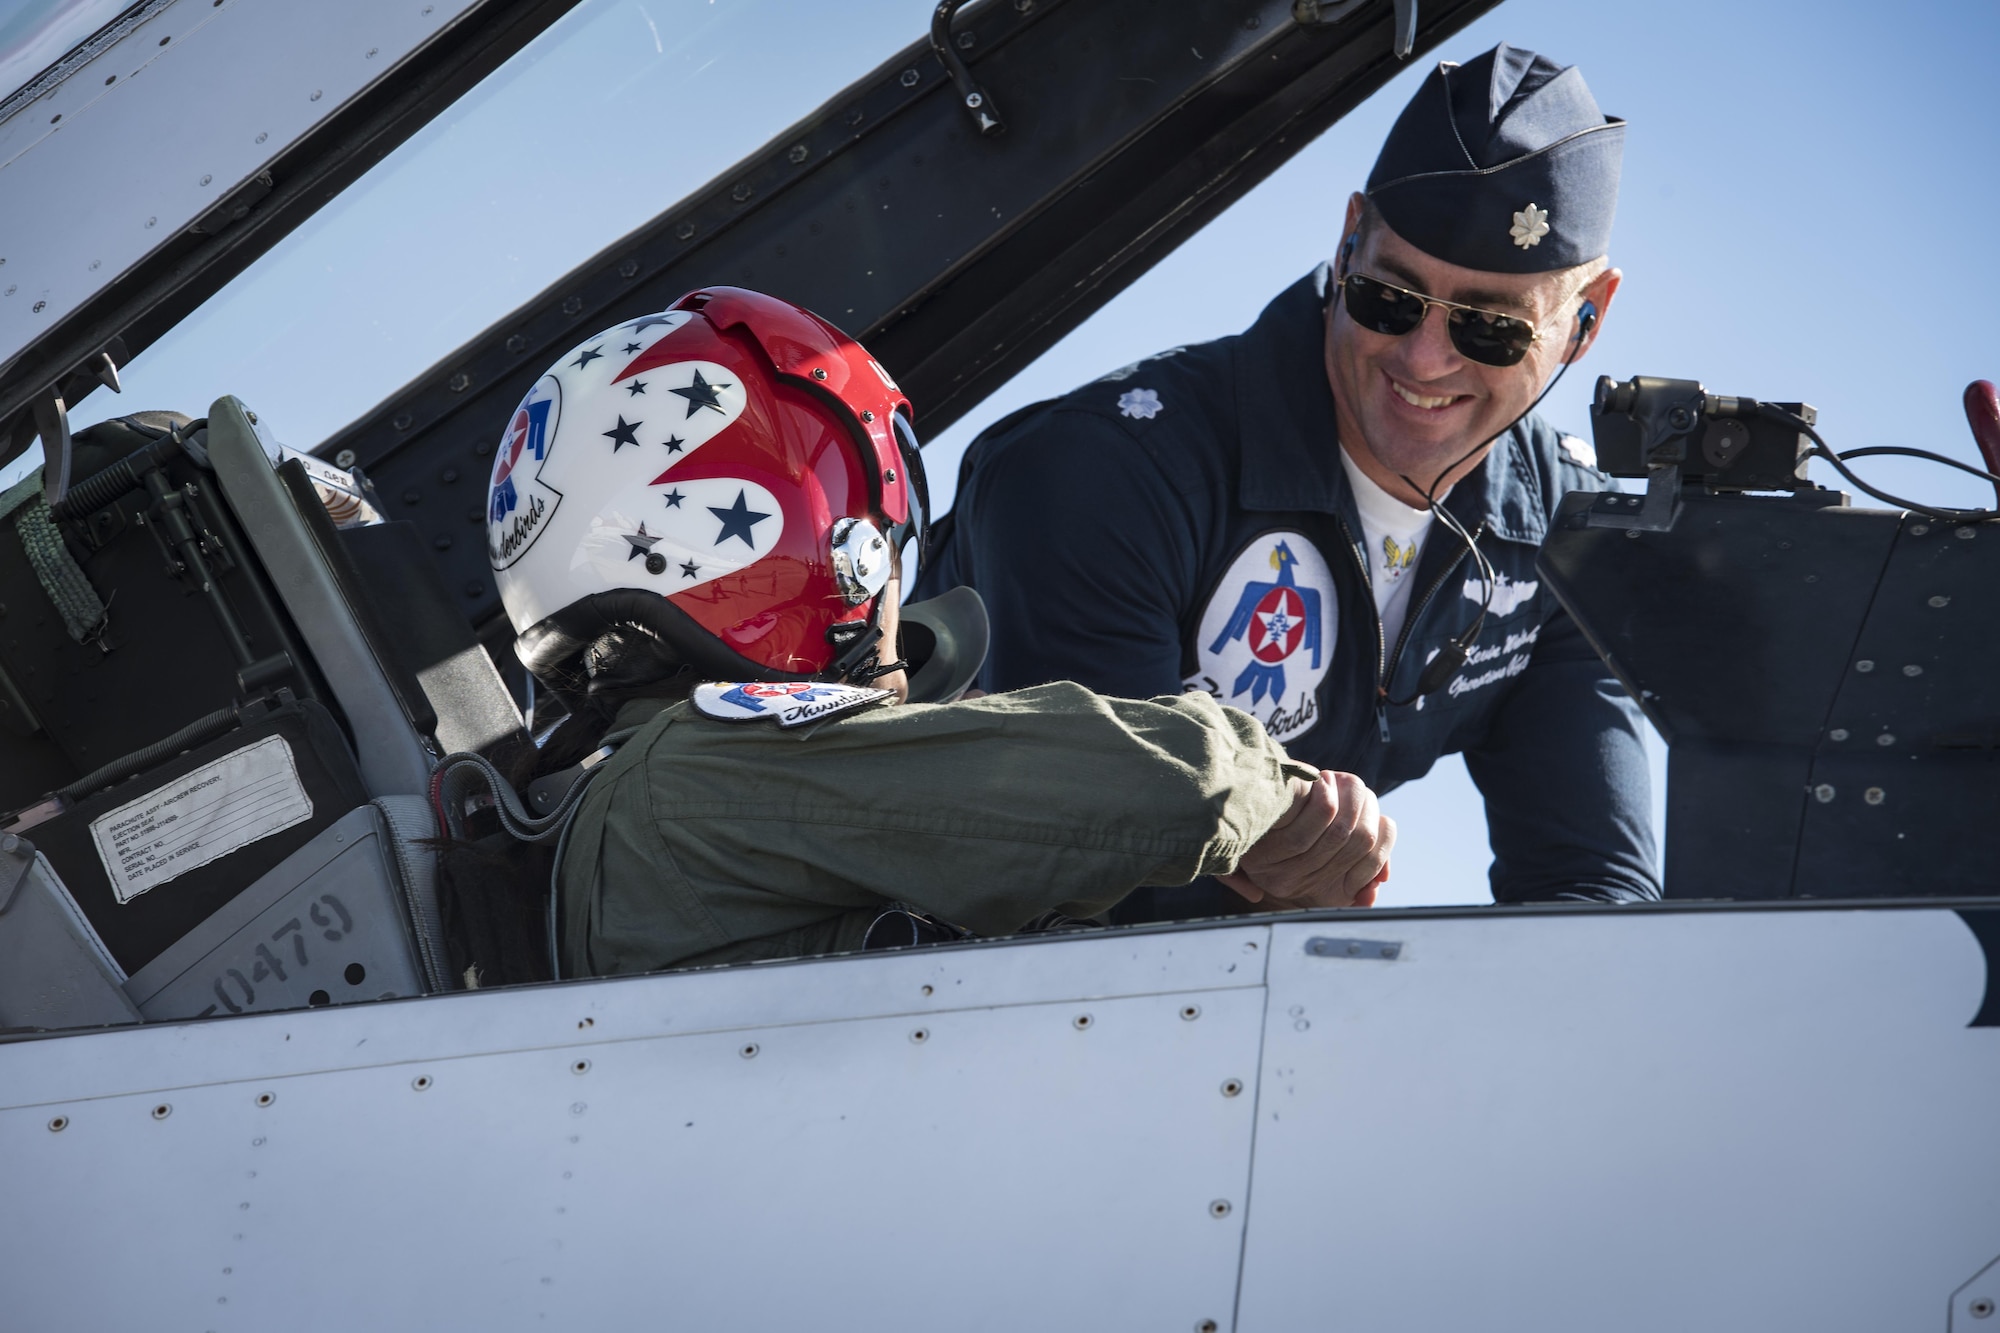 Noelani Mathews, multimedia journalist, shakes hands with Lt. Col. Kevin Walsh, U.S. Air Force Thunderbird pilot No. 7, before her media flight in an F-16D Fighting Falcon, Oct. 27, 2017, at Moody Air Force Base, Ga. The Thunderbirds, based out of Nellis Air Force Base, Nev., are the Air Force’s premier aerial demonstration team, performing at air shows and special events worldwide. (U.S. Air Force photo by Senior Airman Janiqua P. Robinson)